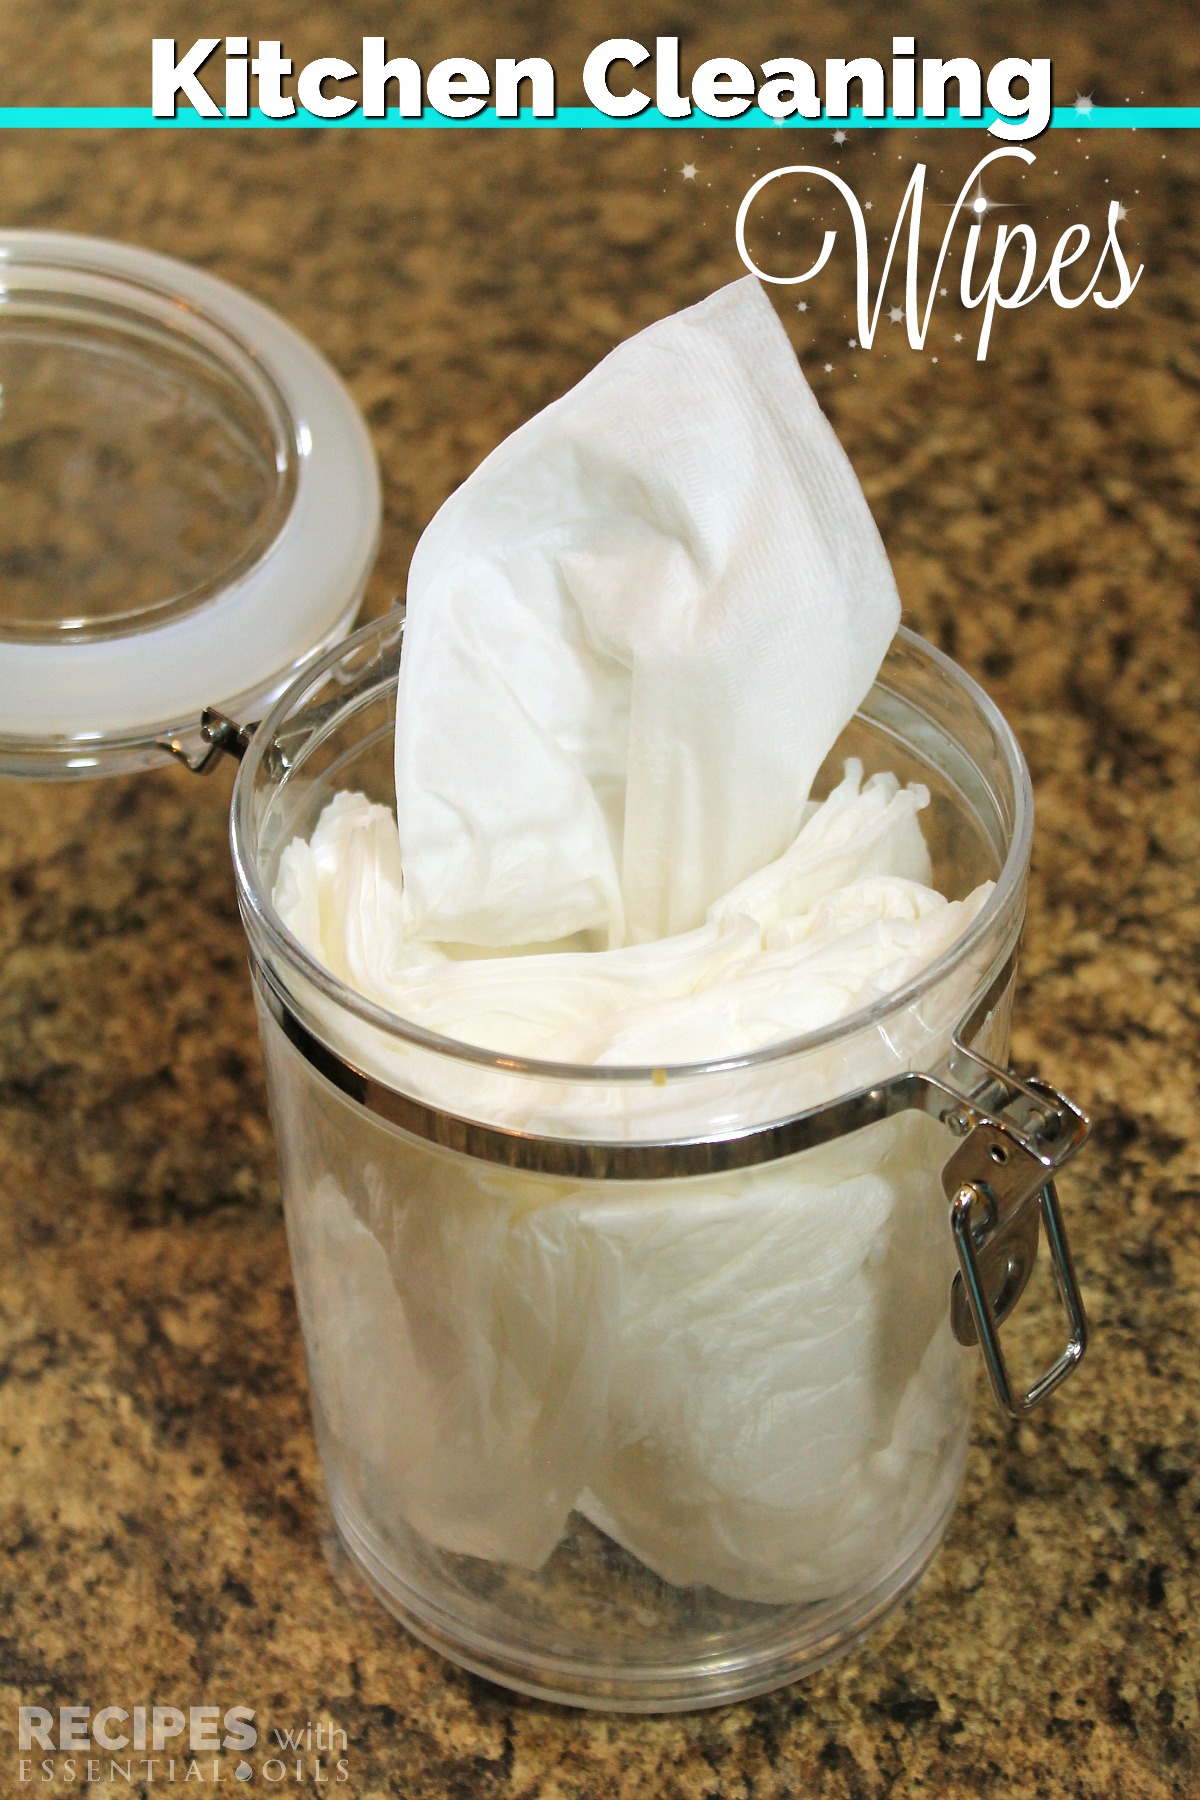 Homemade DIY Kitchen Cleaning Wipes from RecipeswithEssentialOils.com